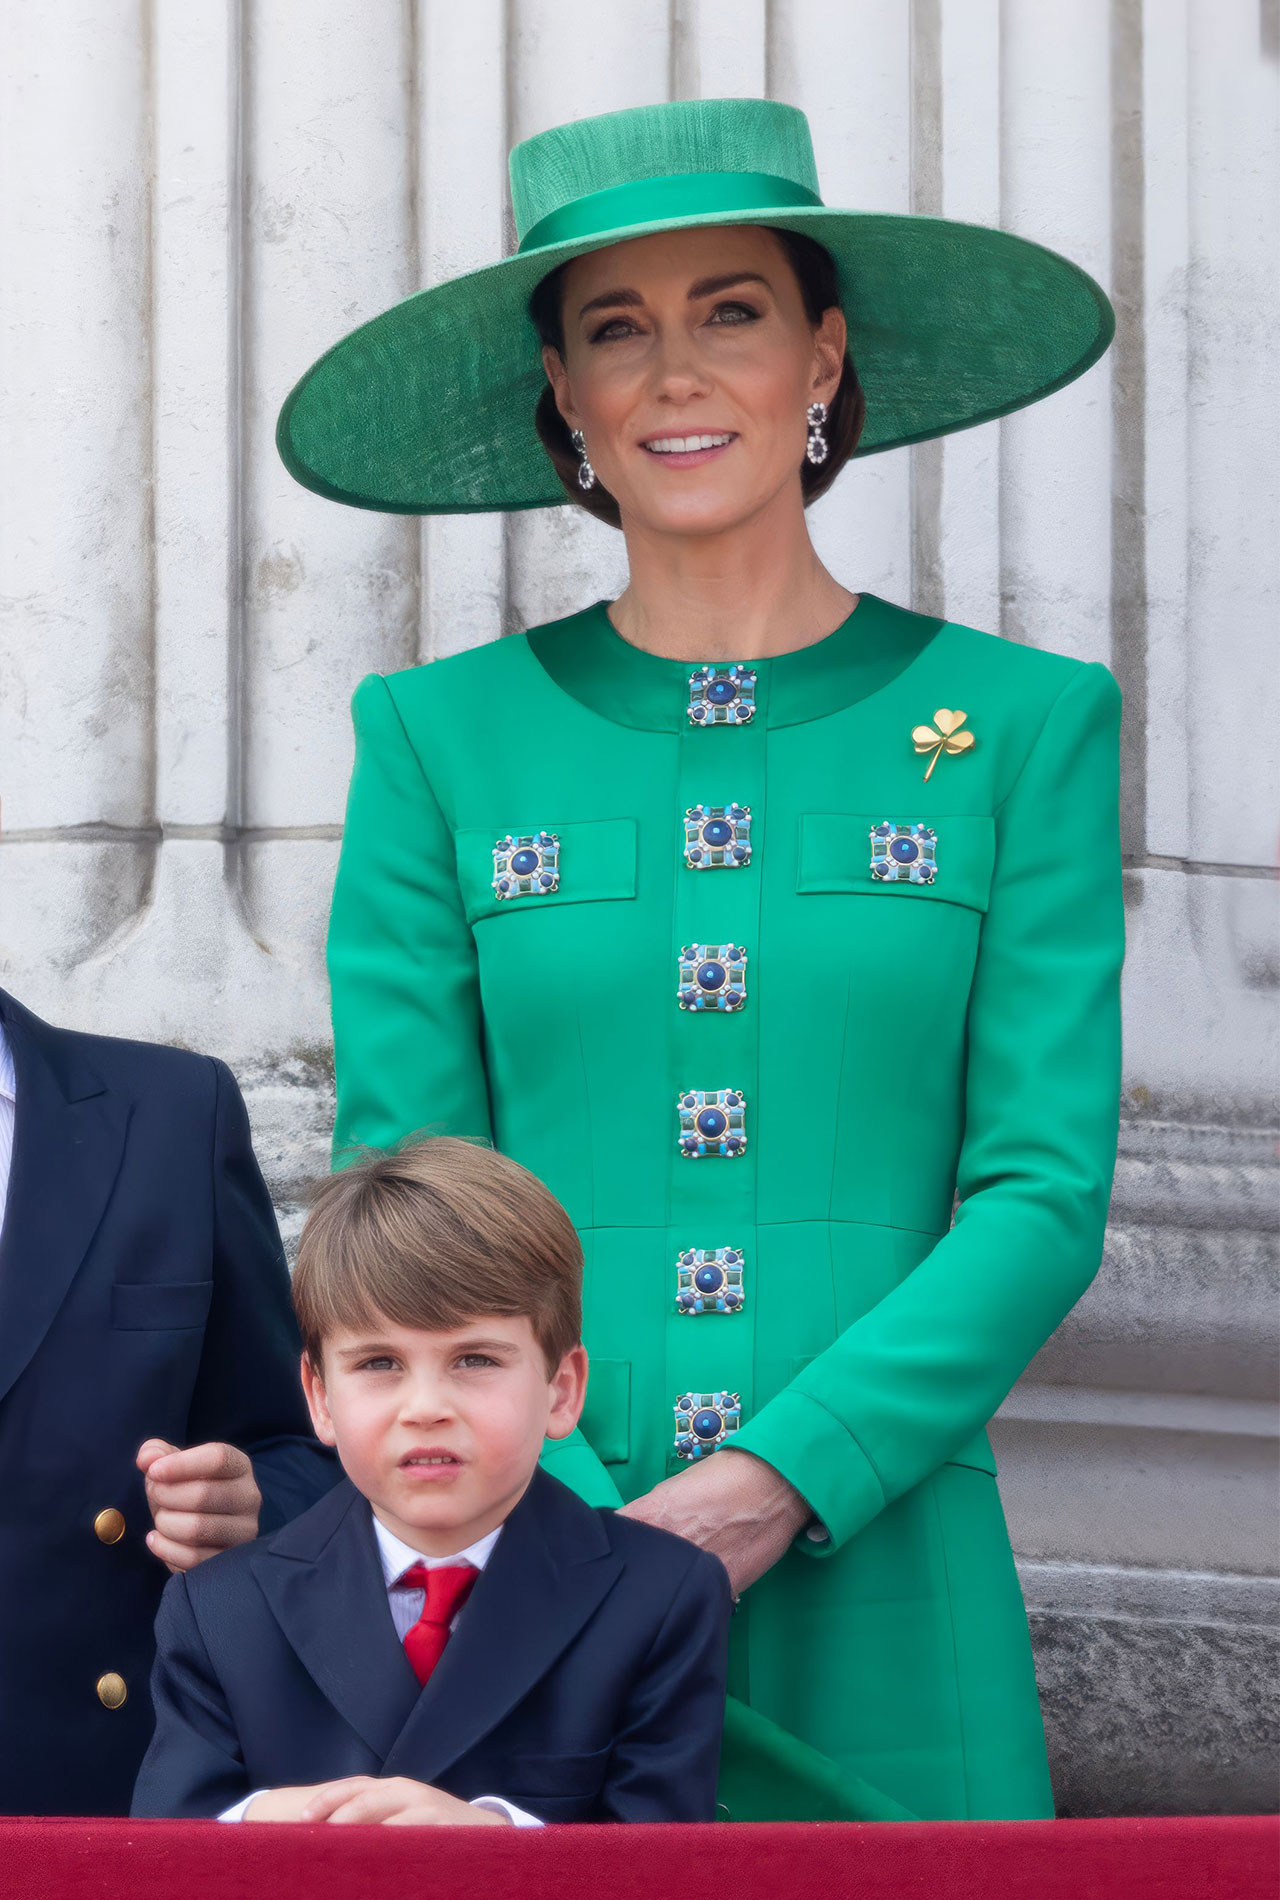 Kate Middleton Shows Off Classy Style in Forest Green Suit